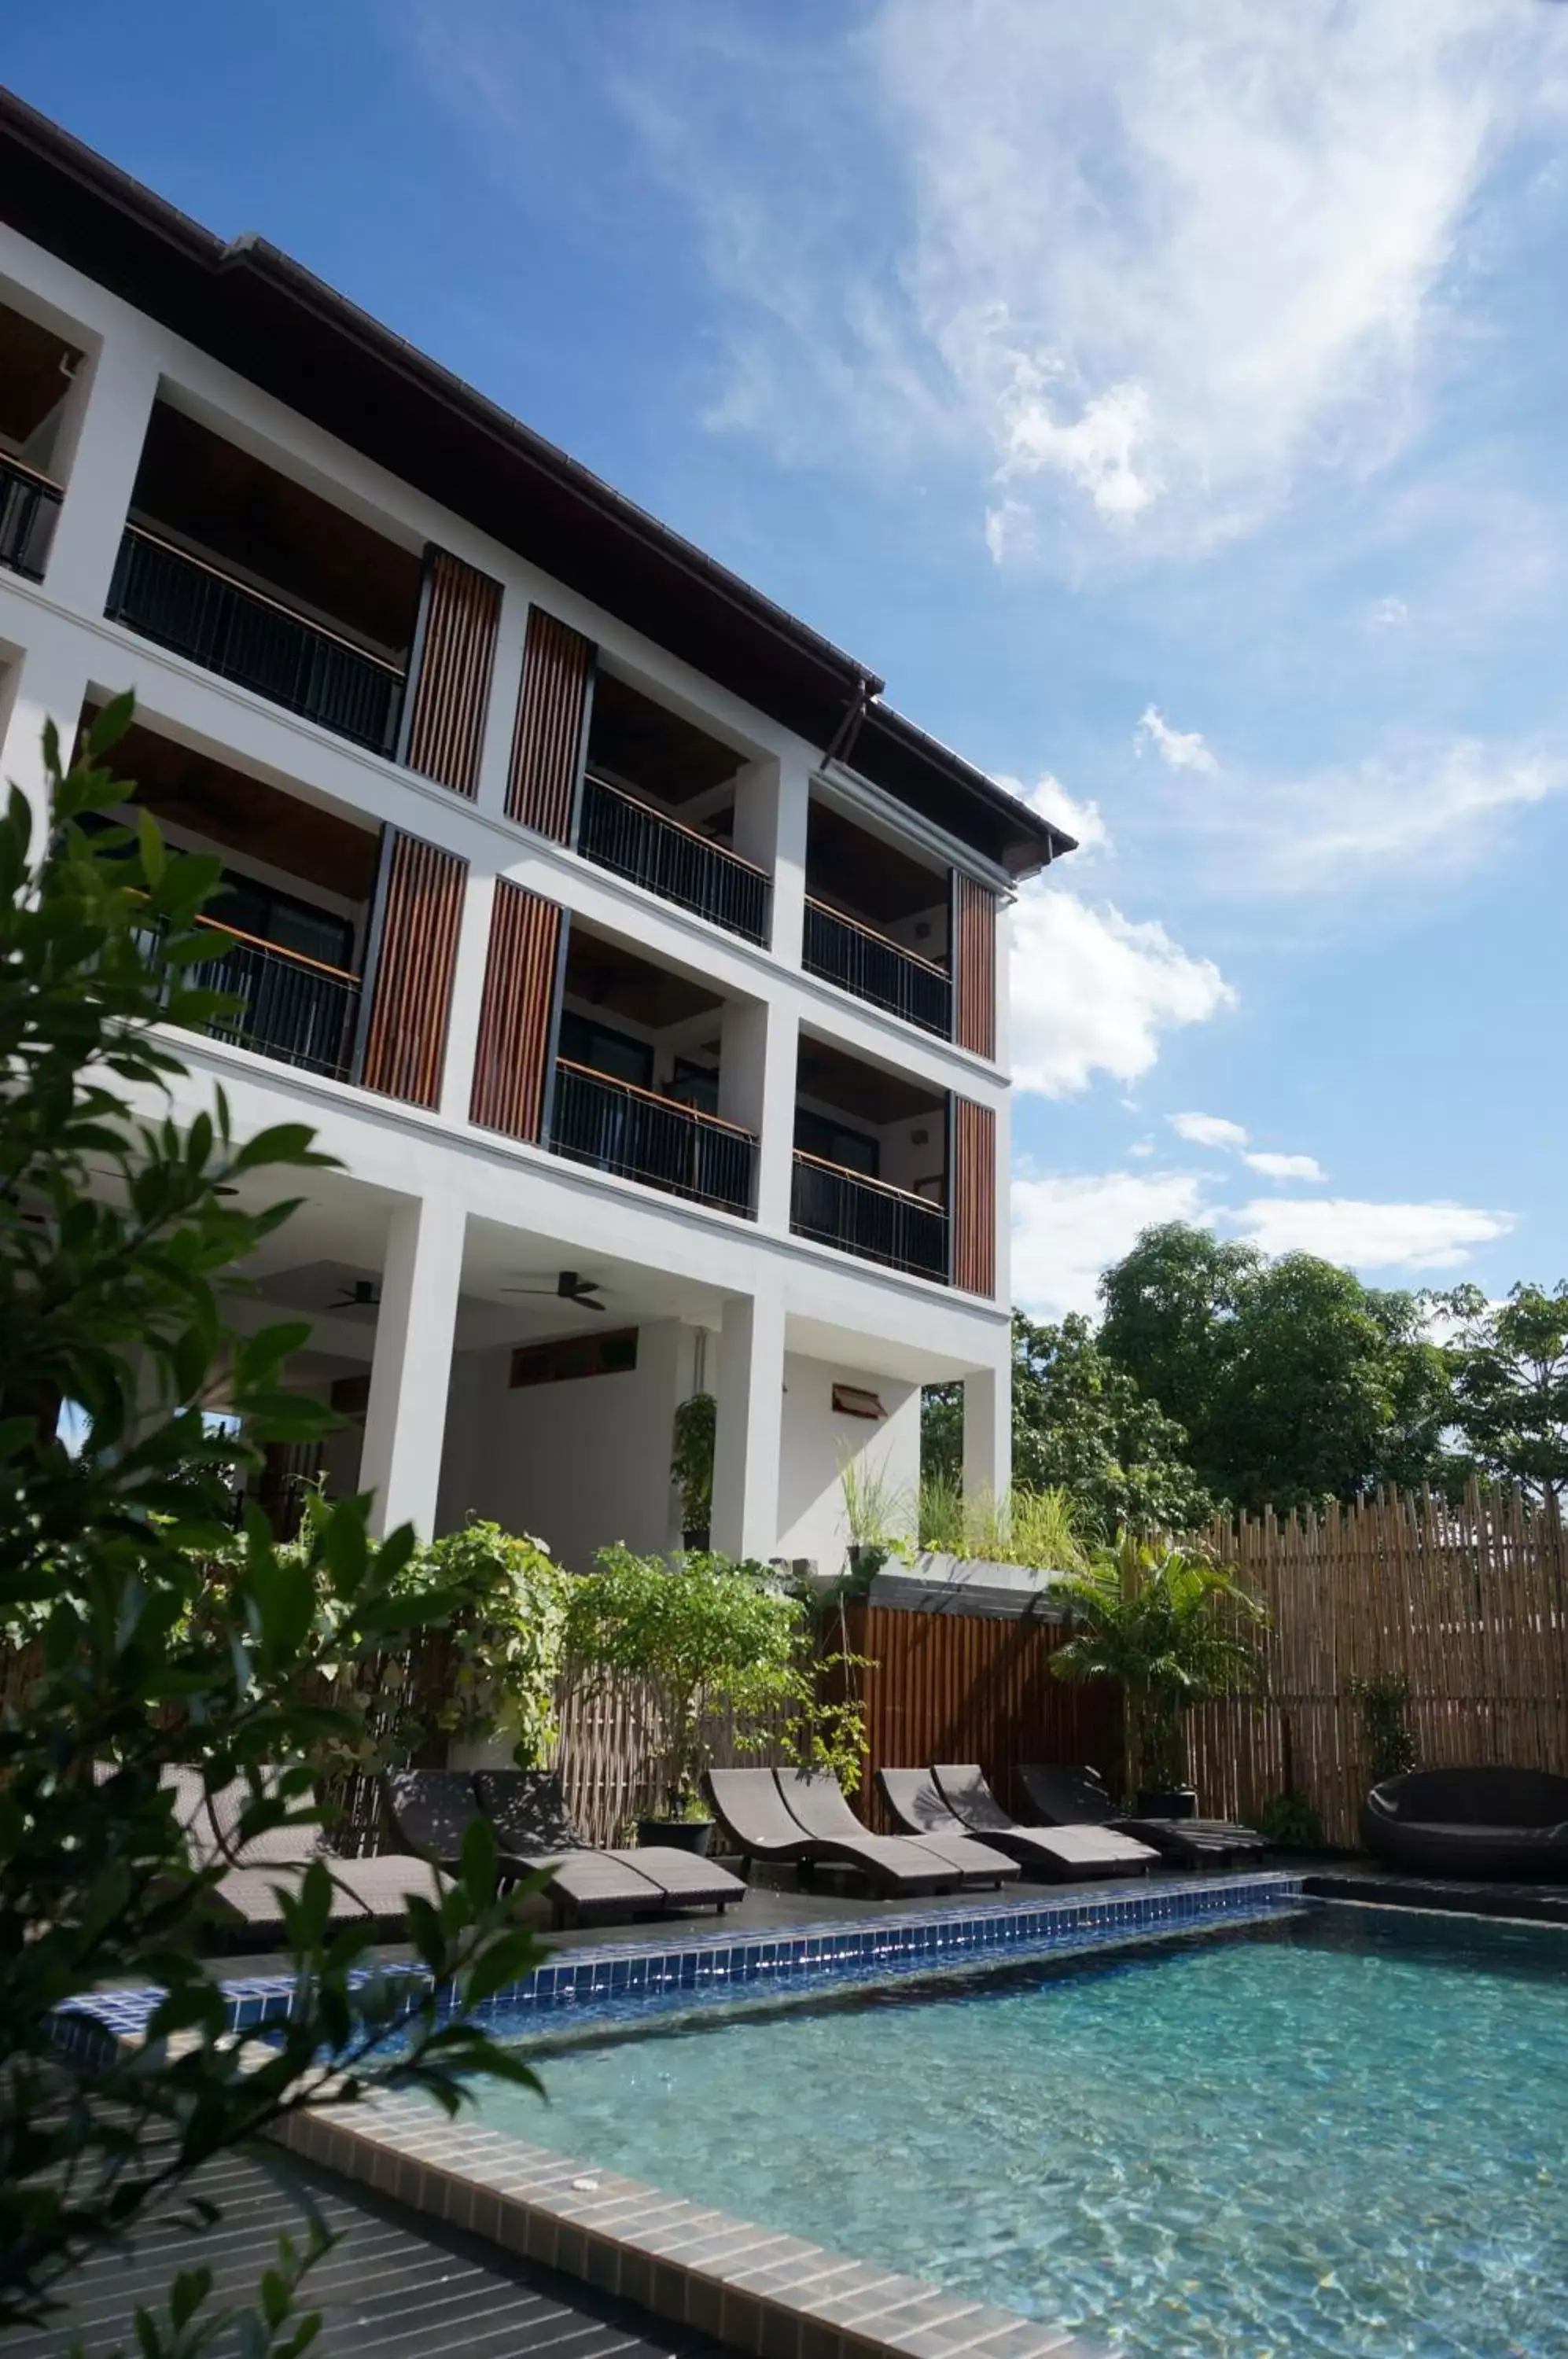 Property Building in SugarCane Chiang Mai